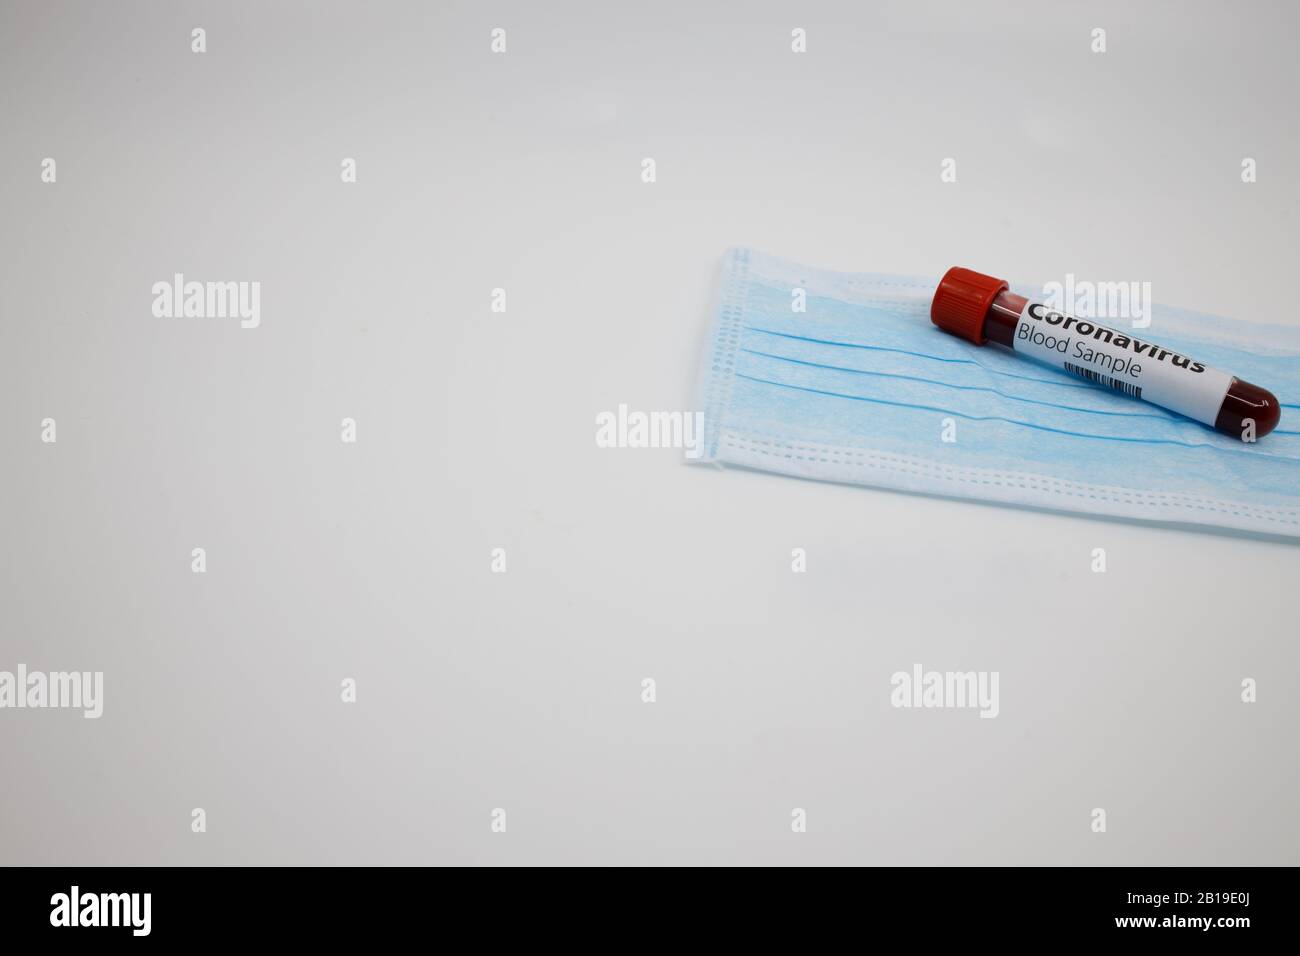 Blood sample for the new rapidly spreading Coronavirus that originated in Wuhan, China. Test tube on a blue surgical mask and white background with co Stock Photo